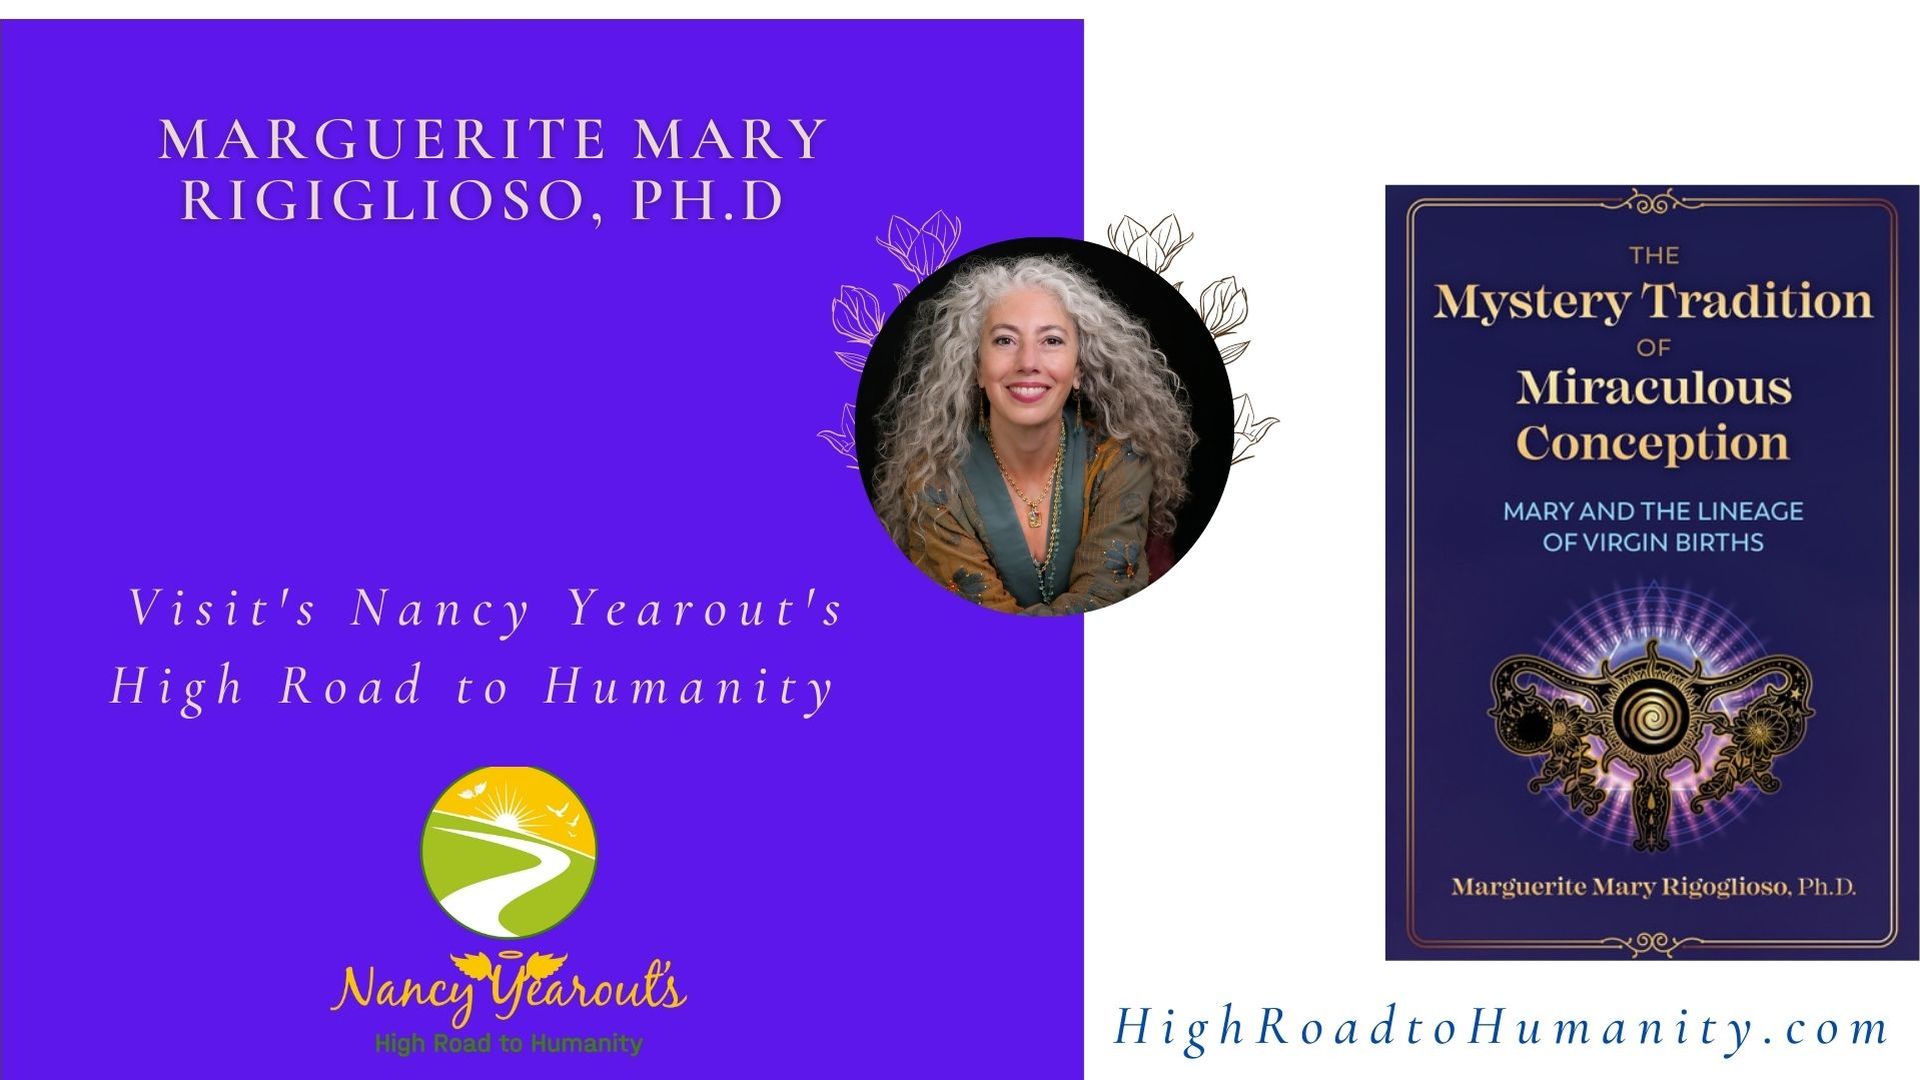 The Mystery Tradition of Miraculous Conception with Marguerite Mary Rigoglioso on High Road